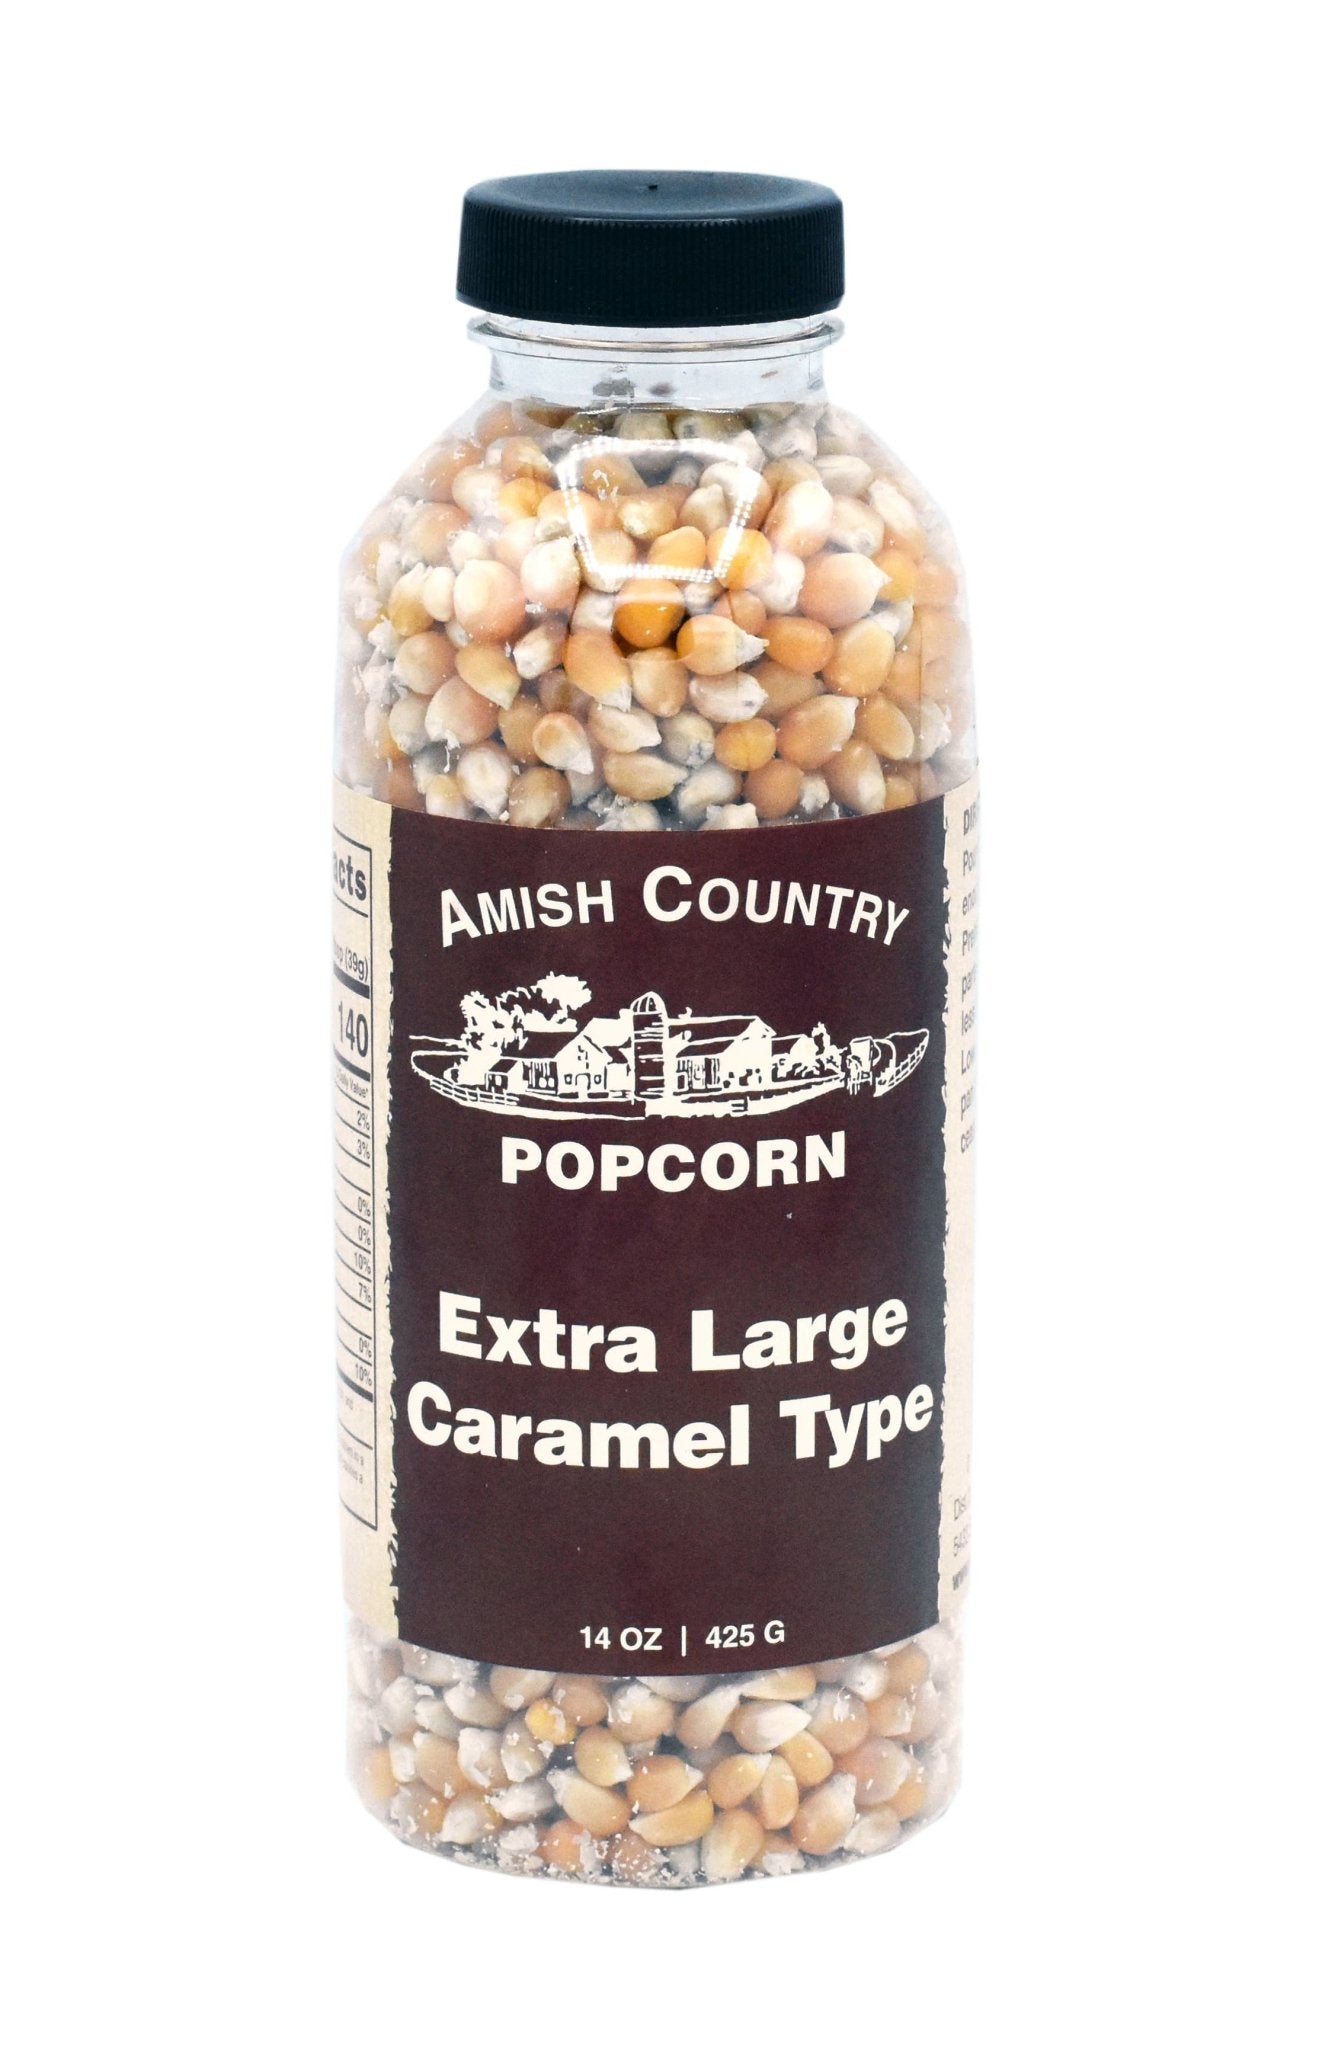 Amish Country Popcorn - 14oz Bottle of Extra Large Caramel Popcorn - Pacific Flyway Supplies